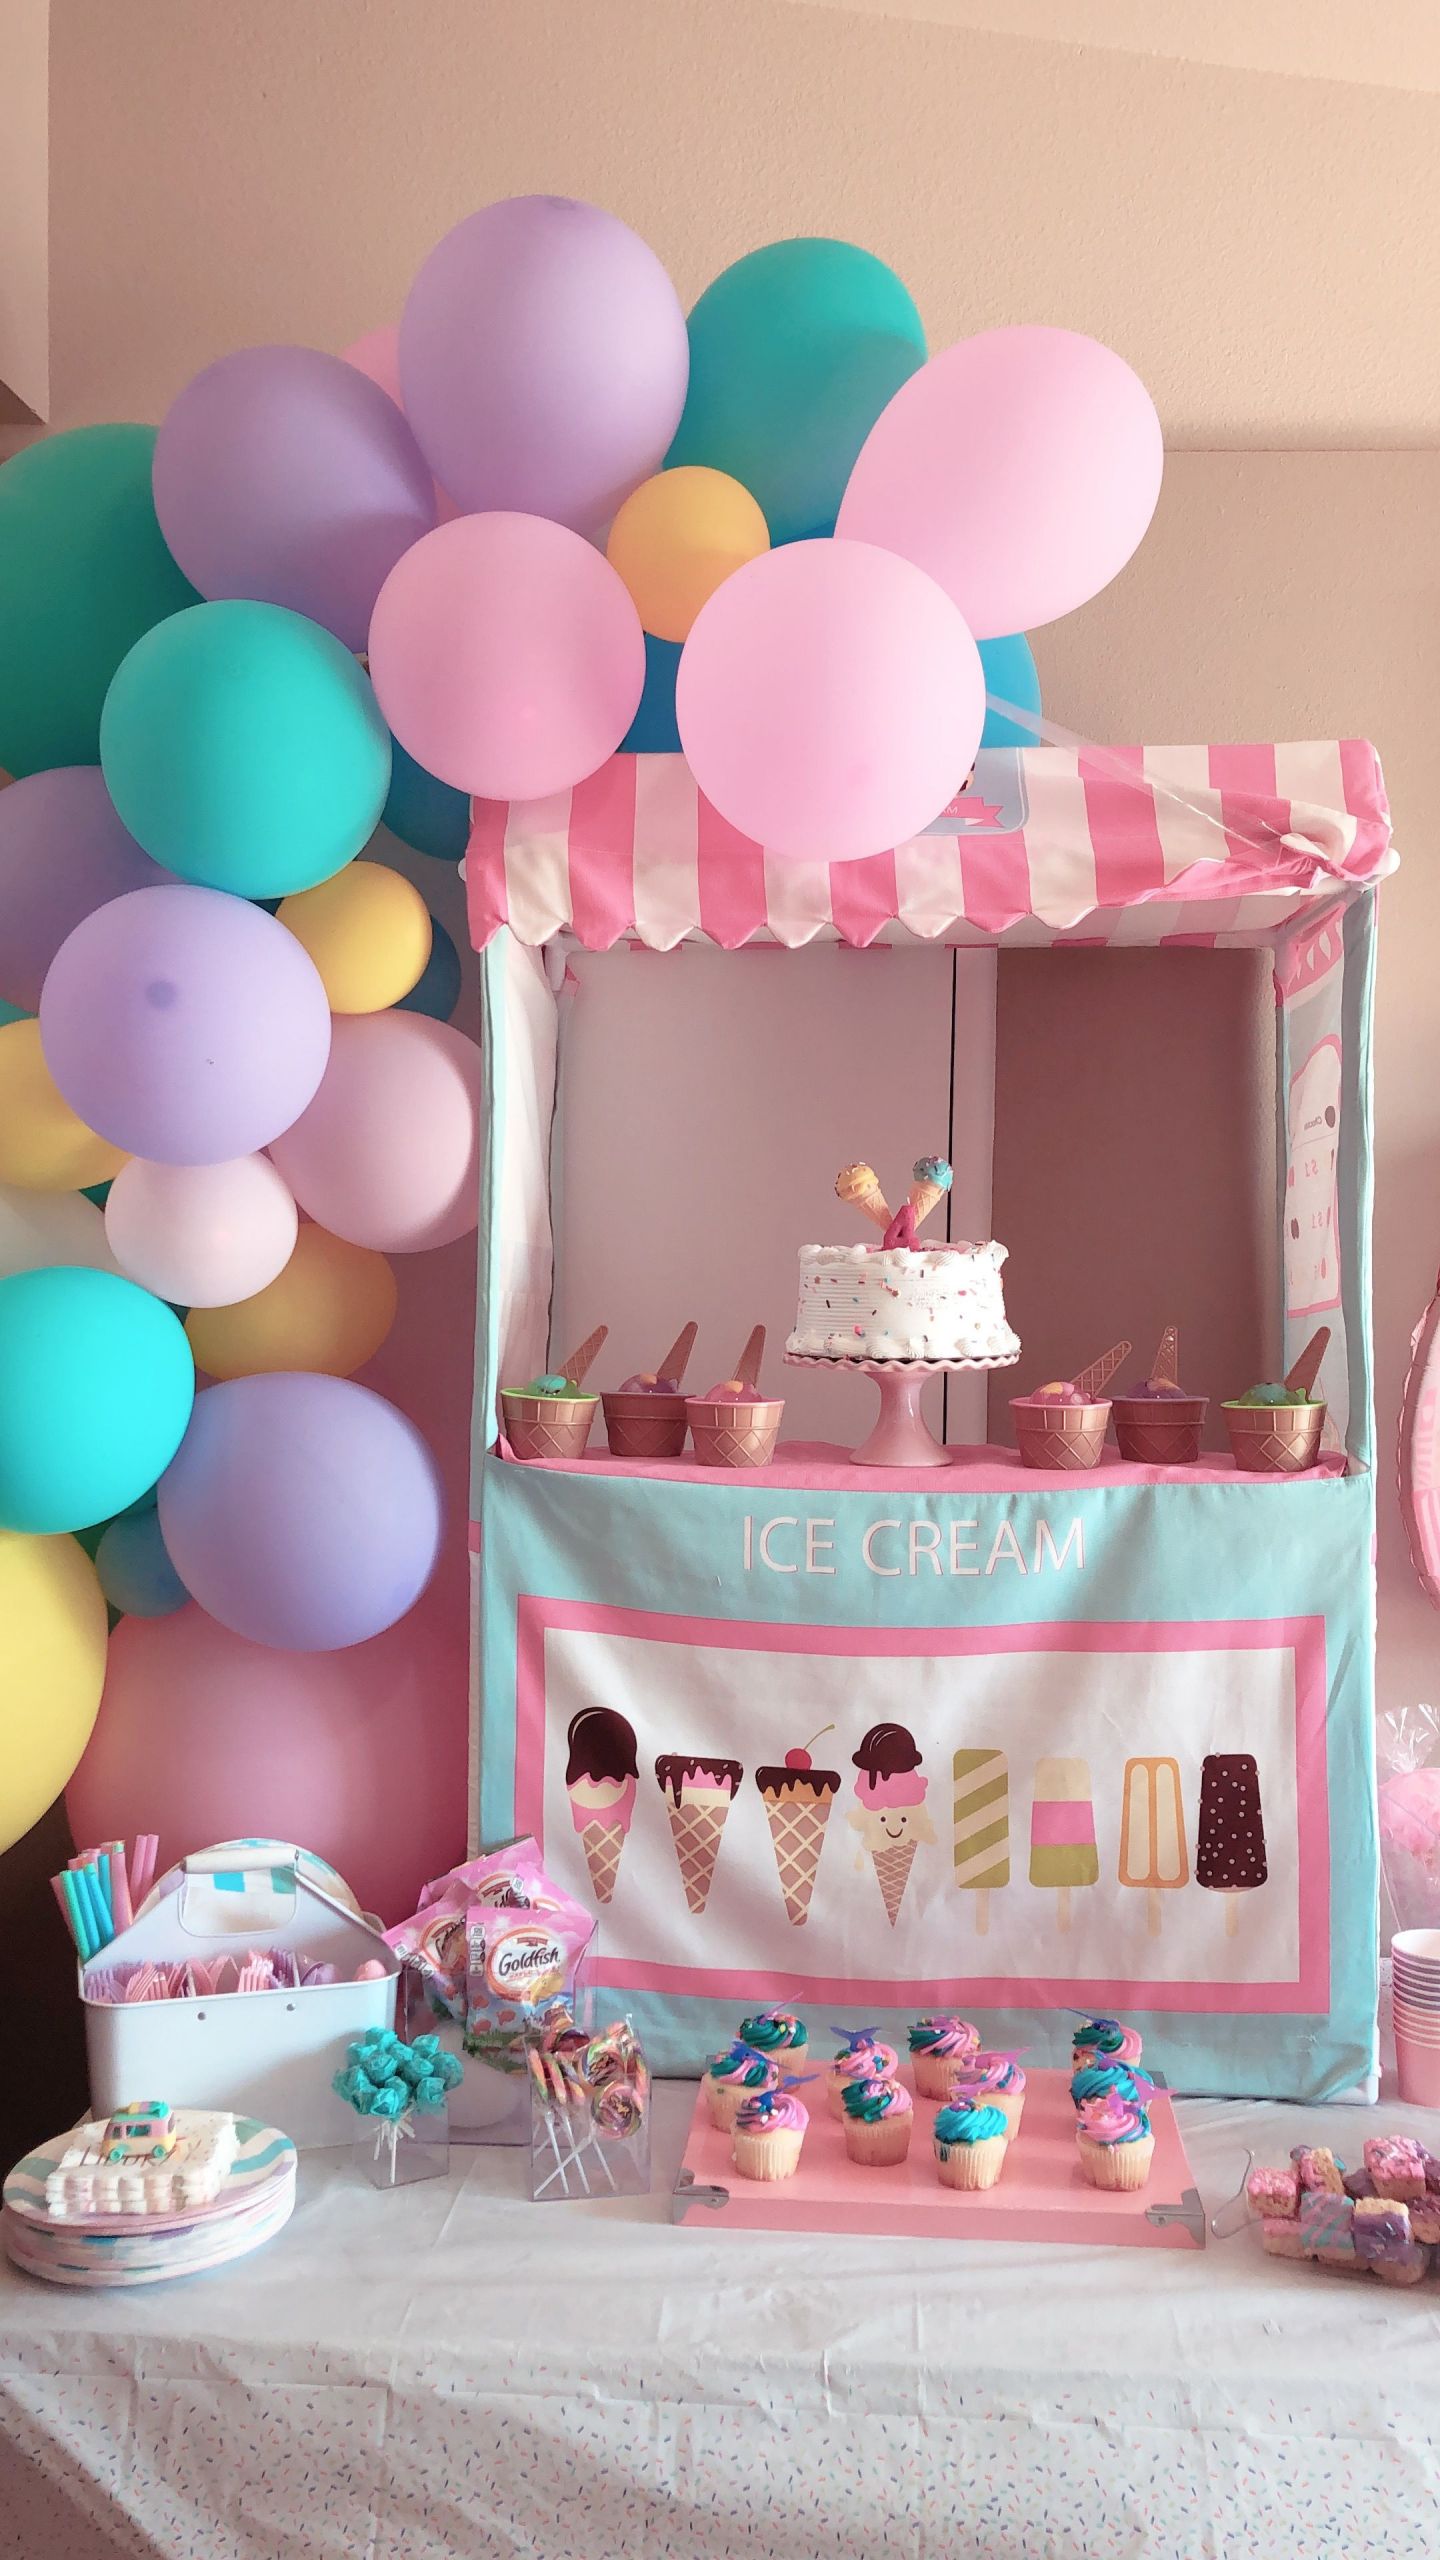 Birthday Party Ideas For 2 Year Girl
 Ice cream birthday party for my 4 year old in 2019